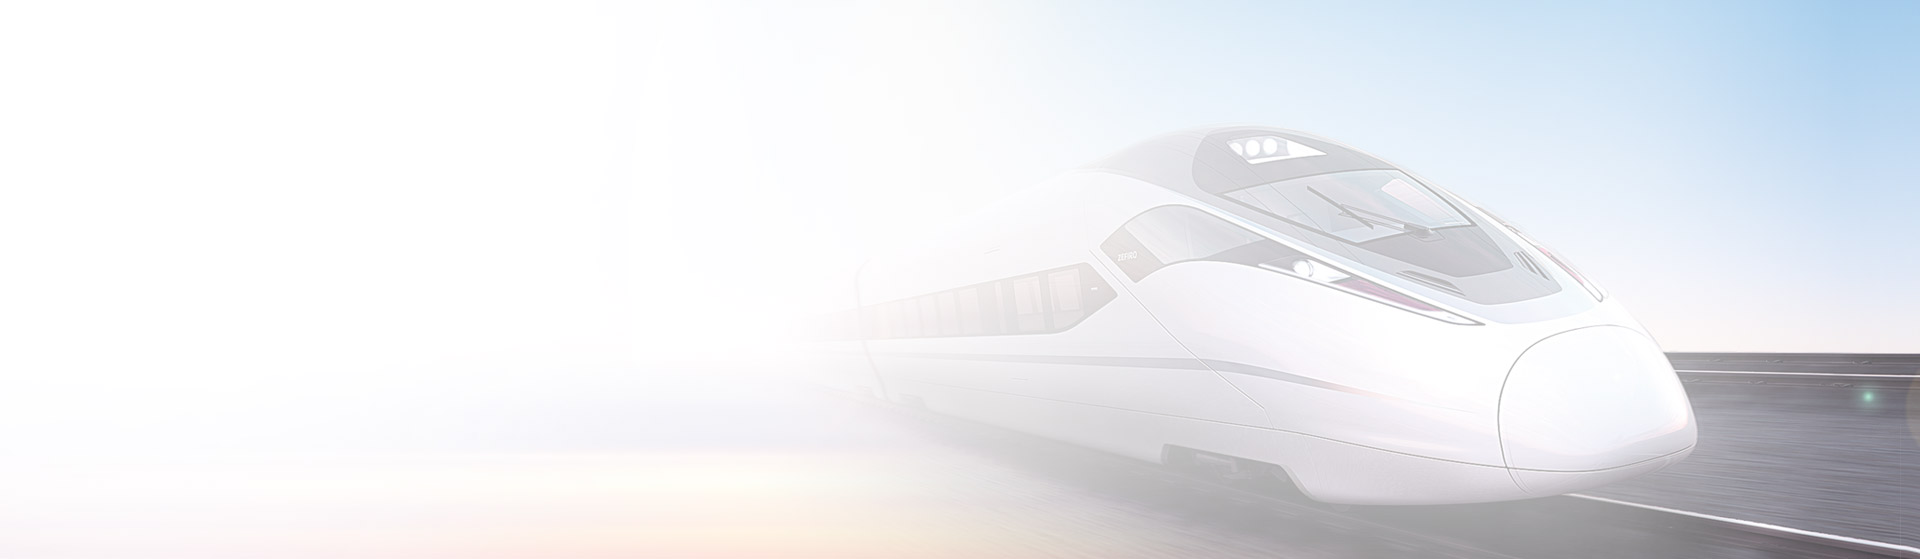 Millisecond roaming switching,Create a high speed mobile internet experience for rail transit